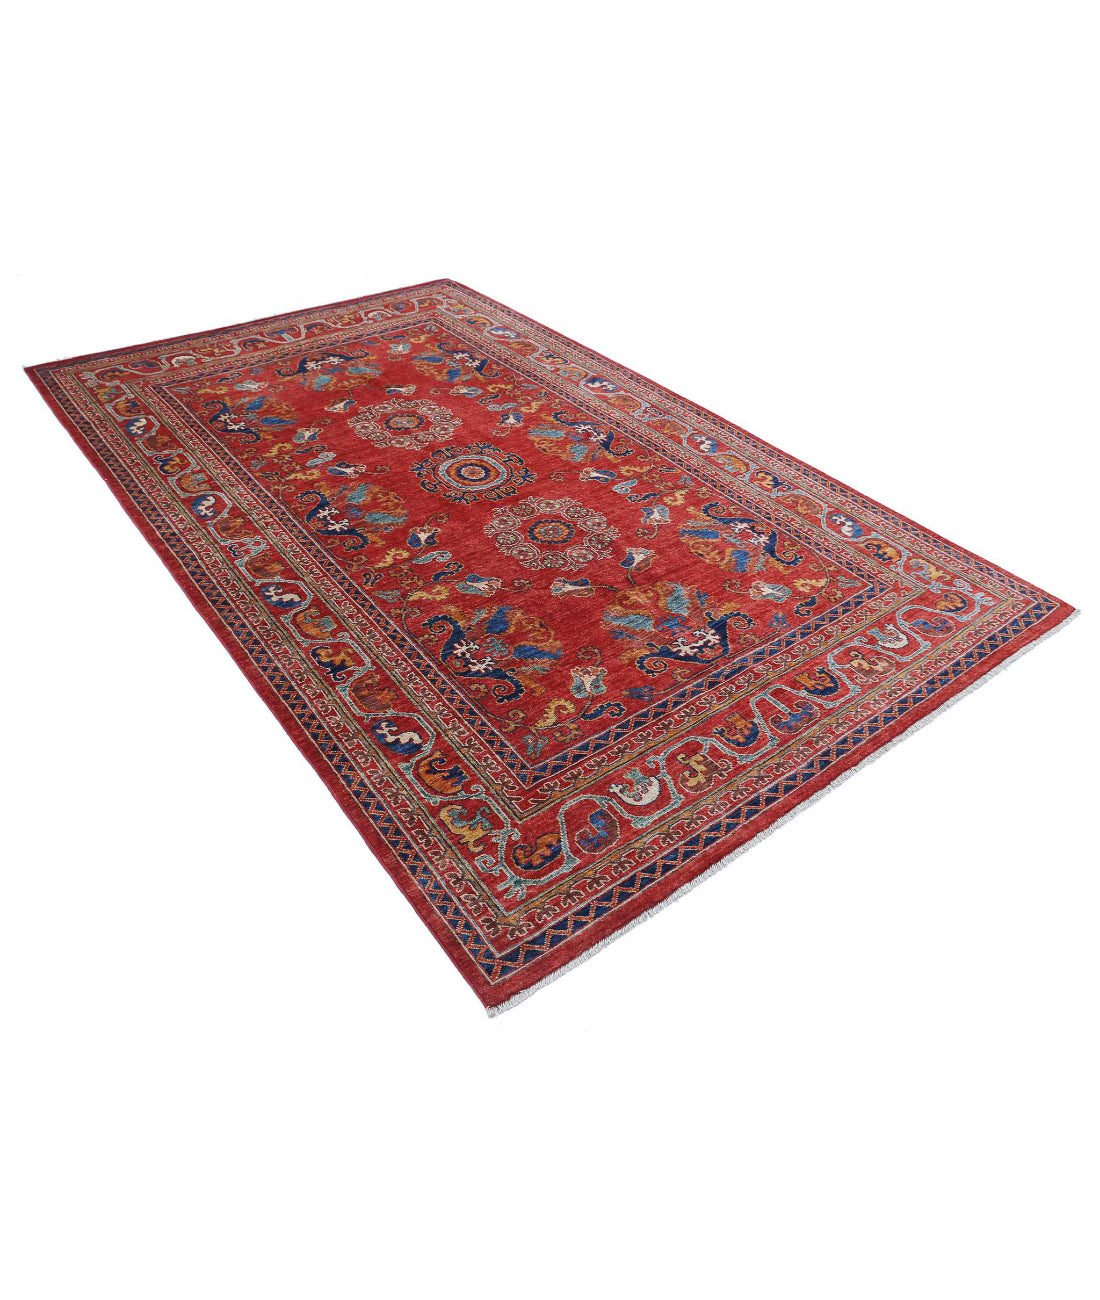 Hand Knotted Nomadic Caucasian Humna Wool Rug - 5'10'' x 9'1'' 5'10'' x 9'1'' (175 X 273) / Red / Gold